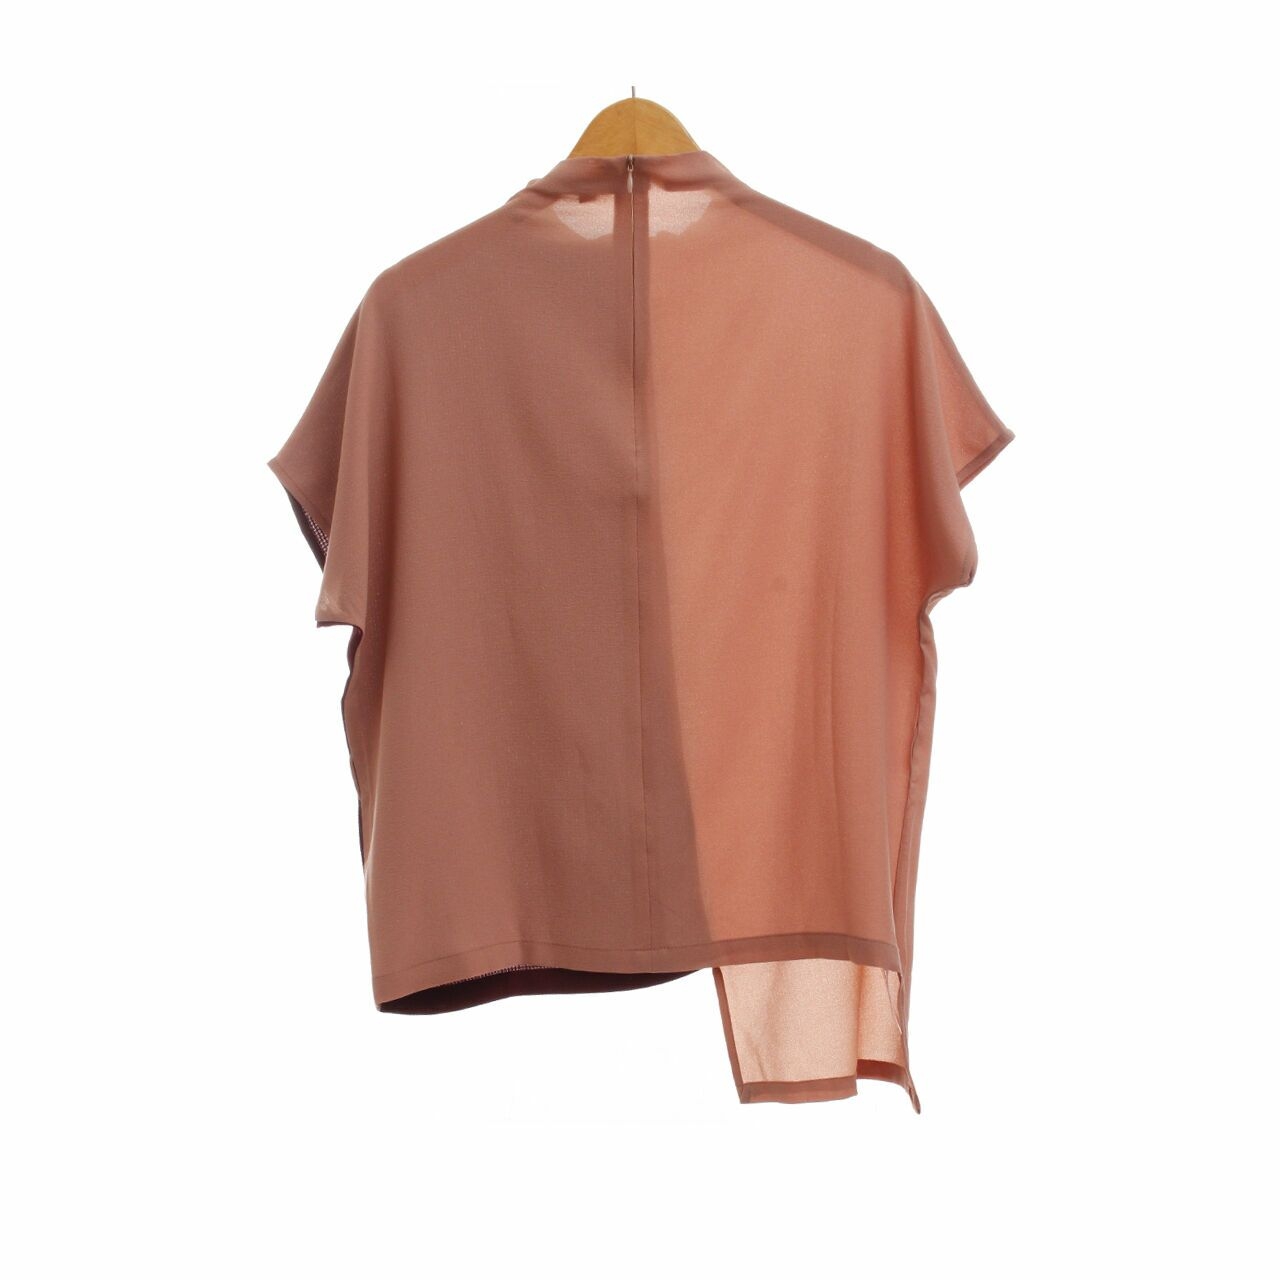 The Pixie Rack Dusty Pink & Wine Blouse